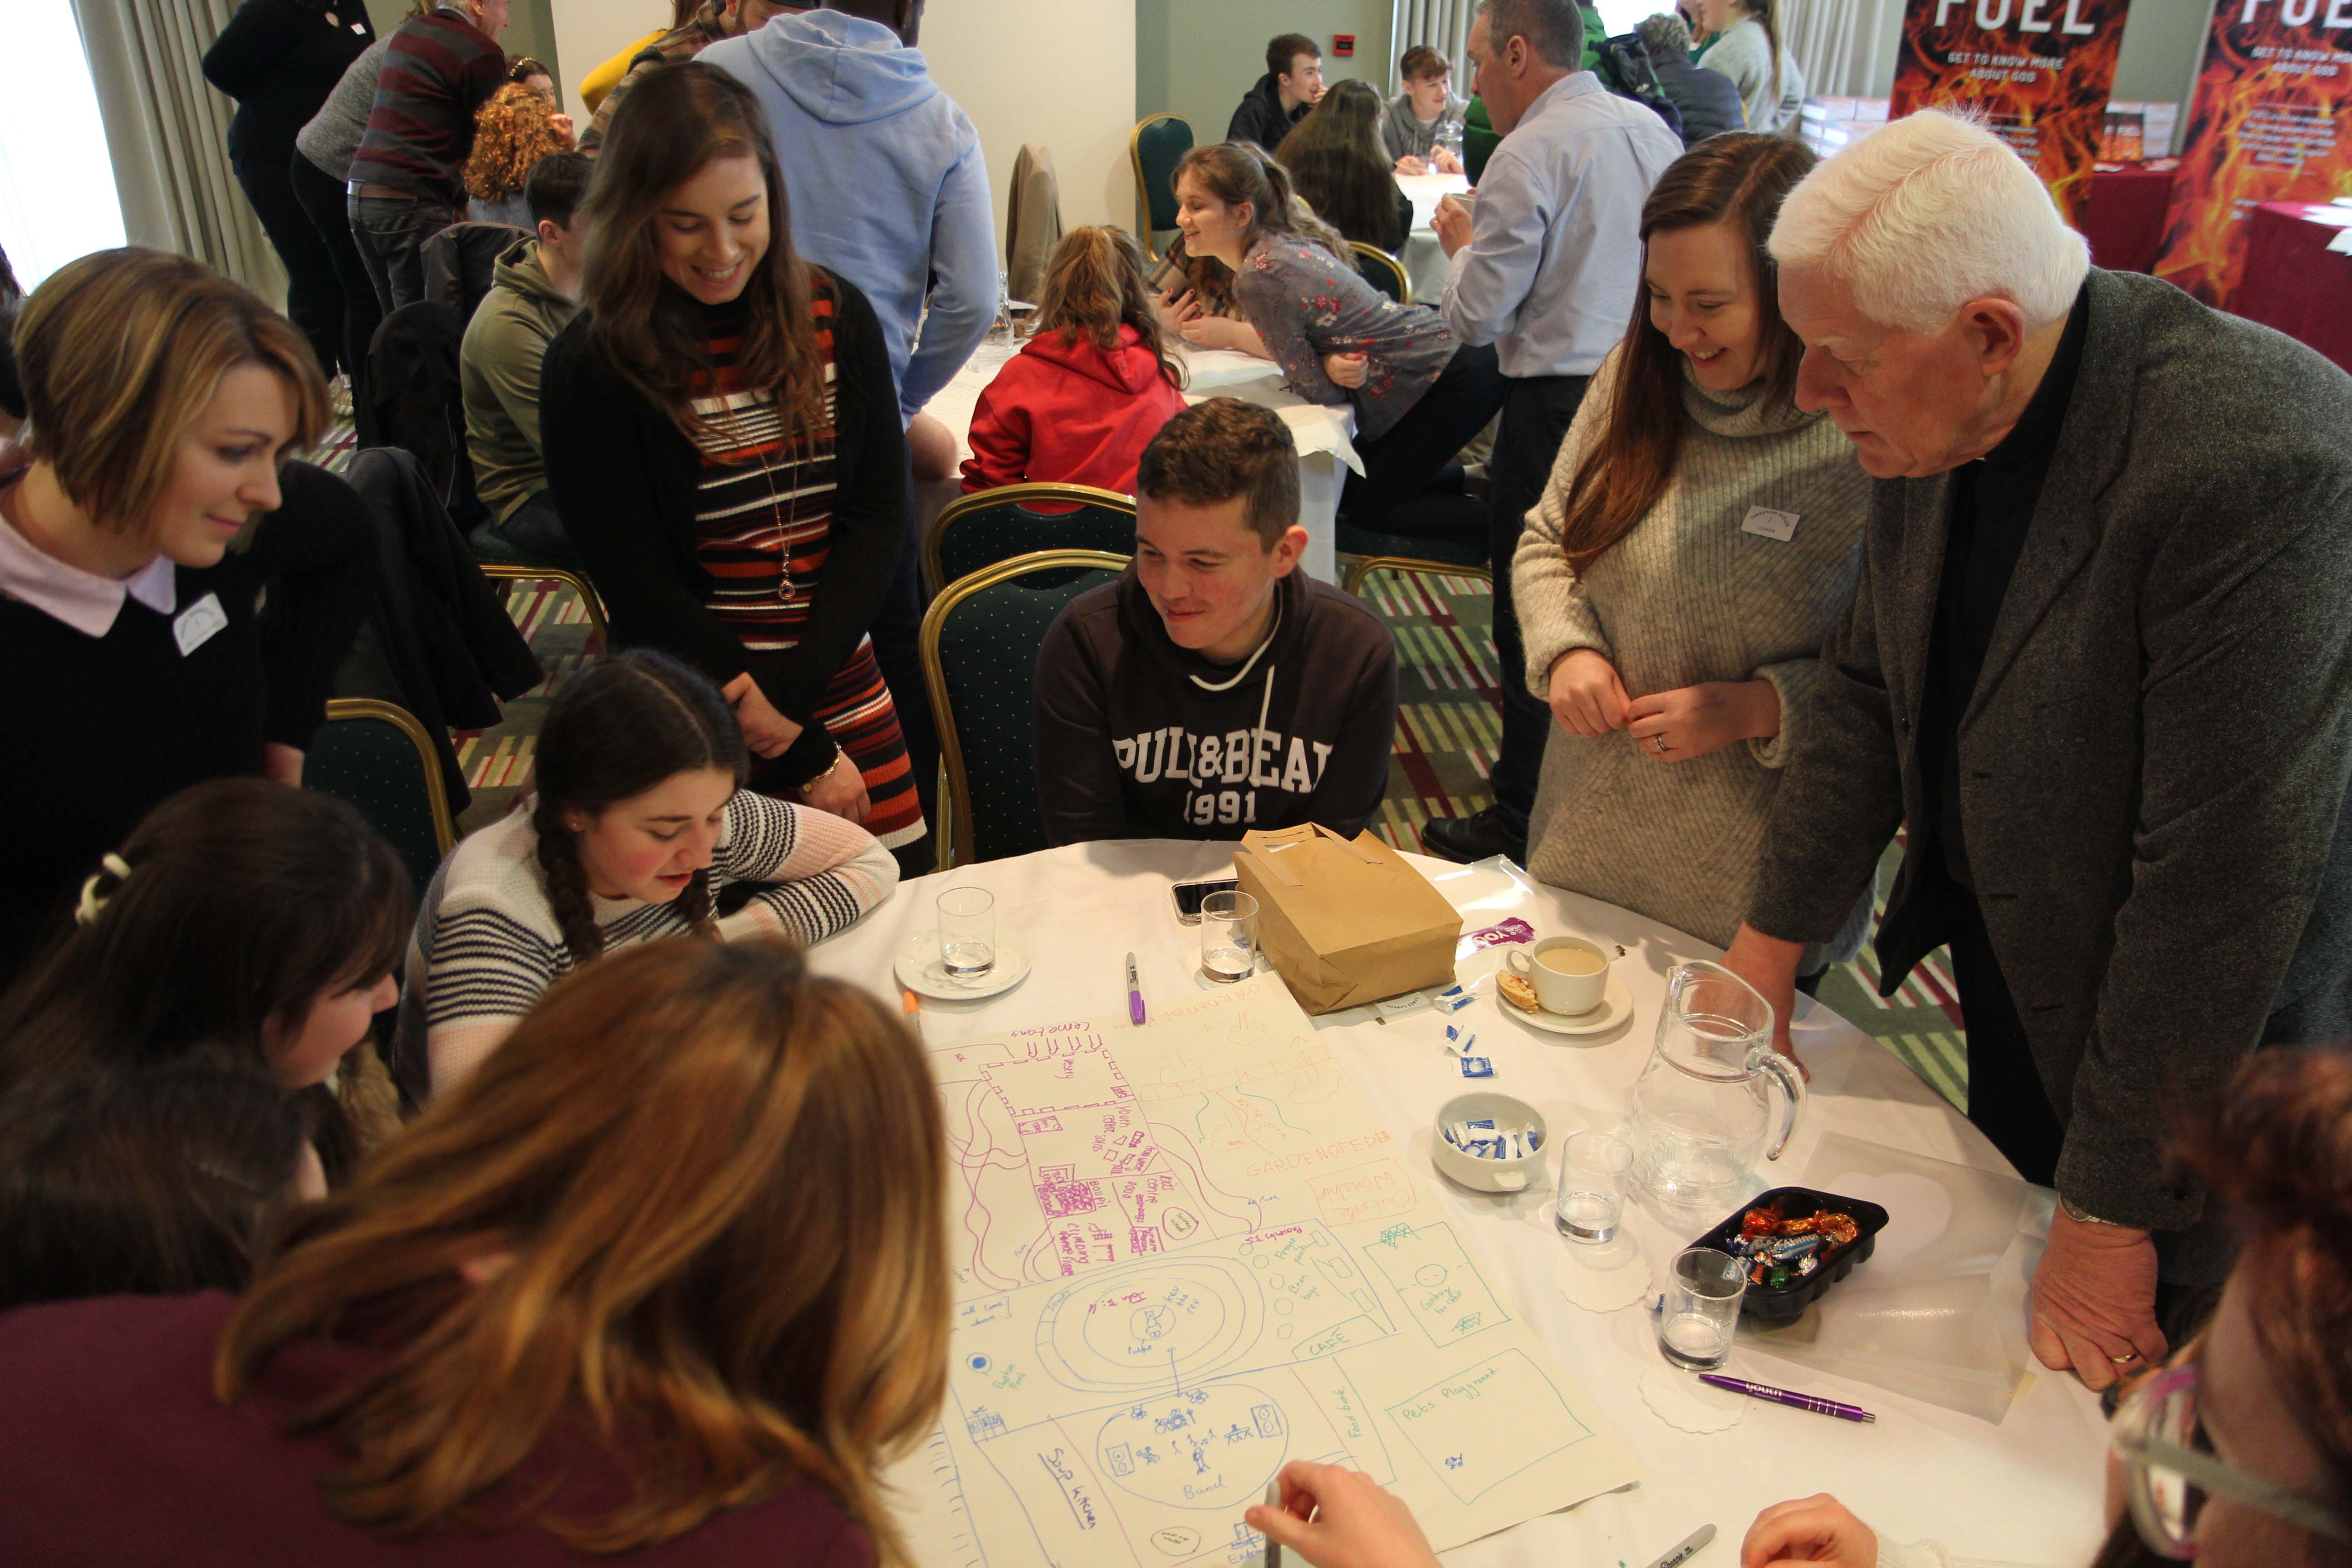 Some of the young diocesan representatives at the Church of Ireland Youth Forum explain their ideas for church design to the youth leaders.